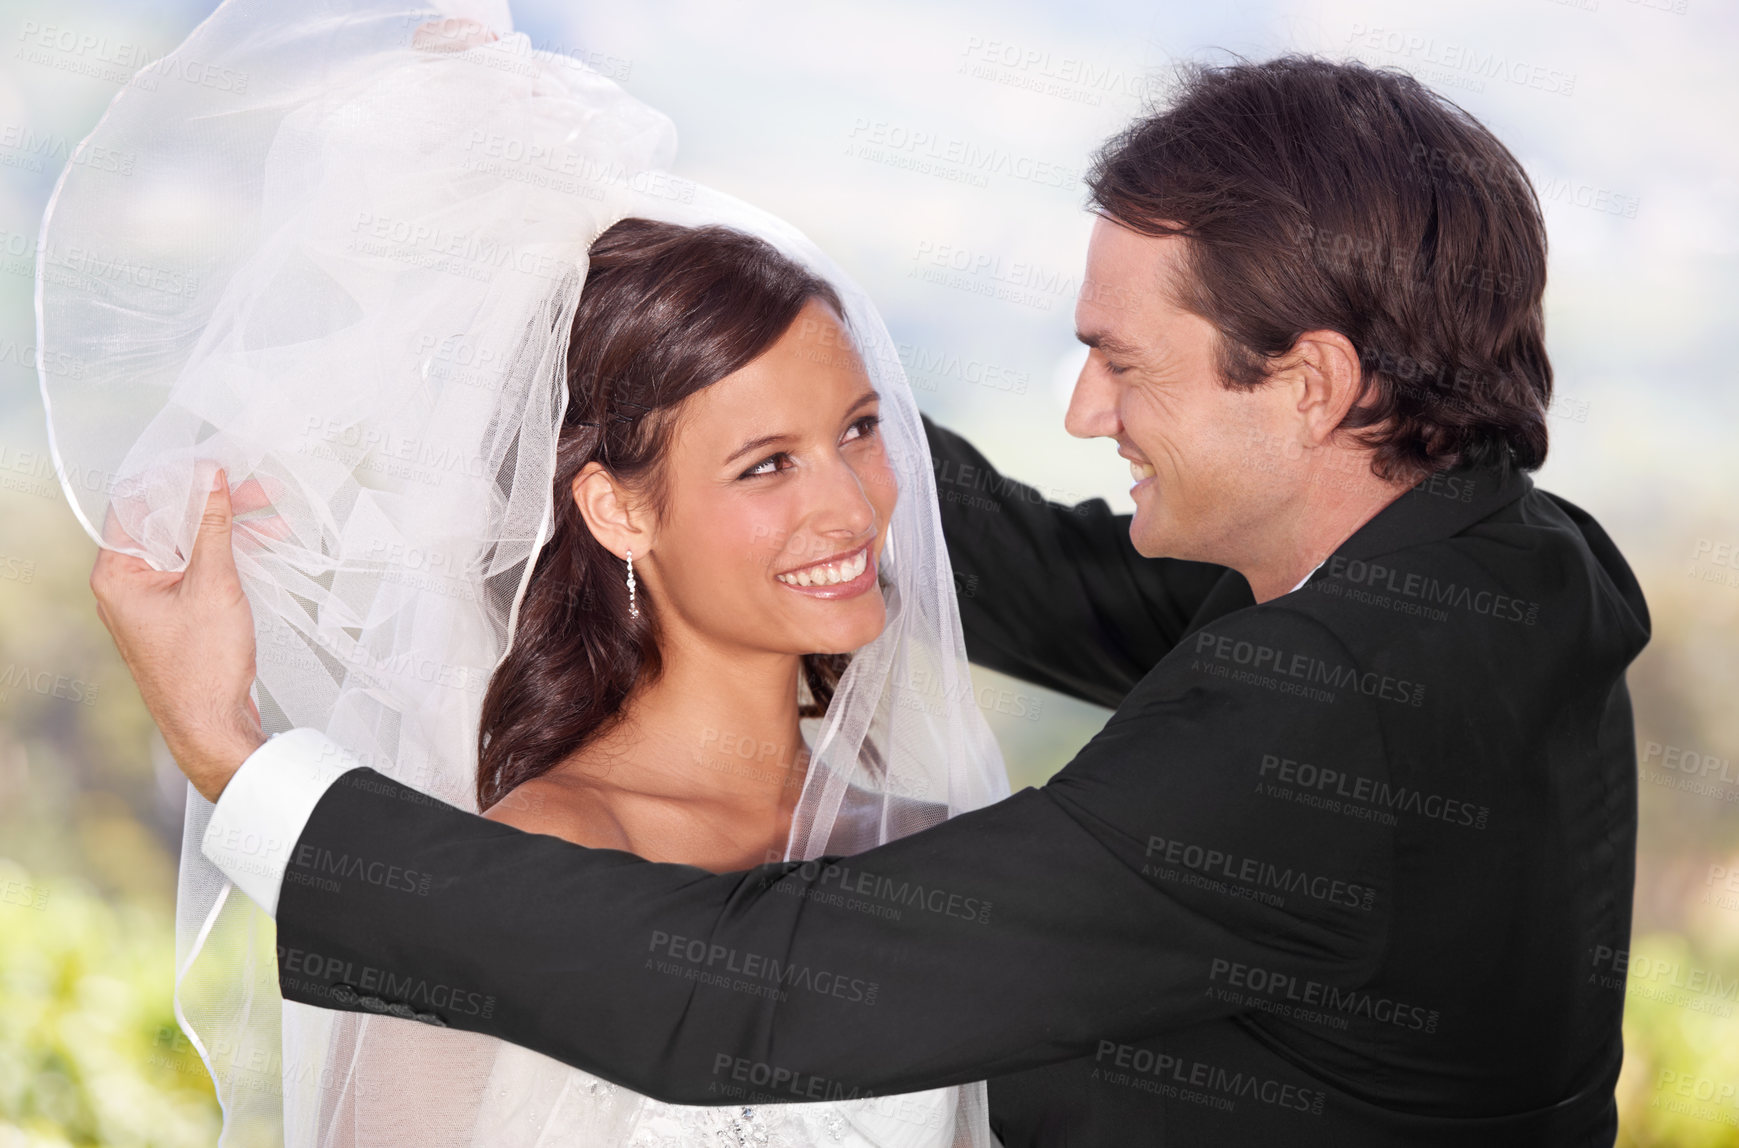 Buy stock photo A bride and groom on their wedding day